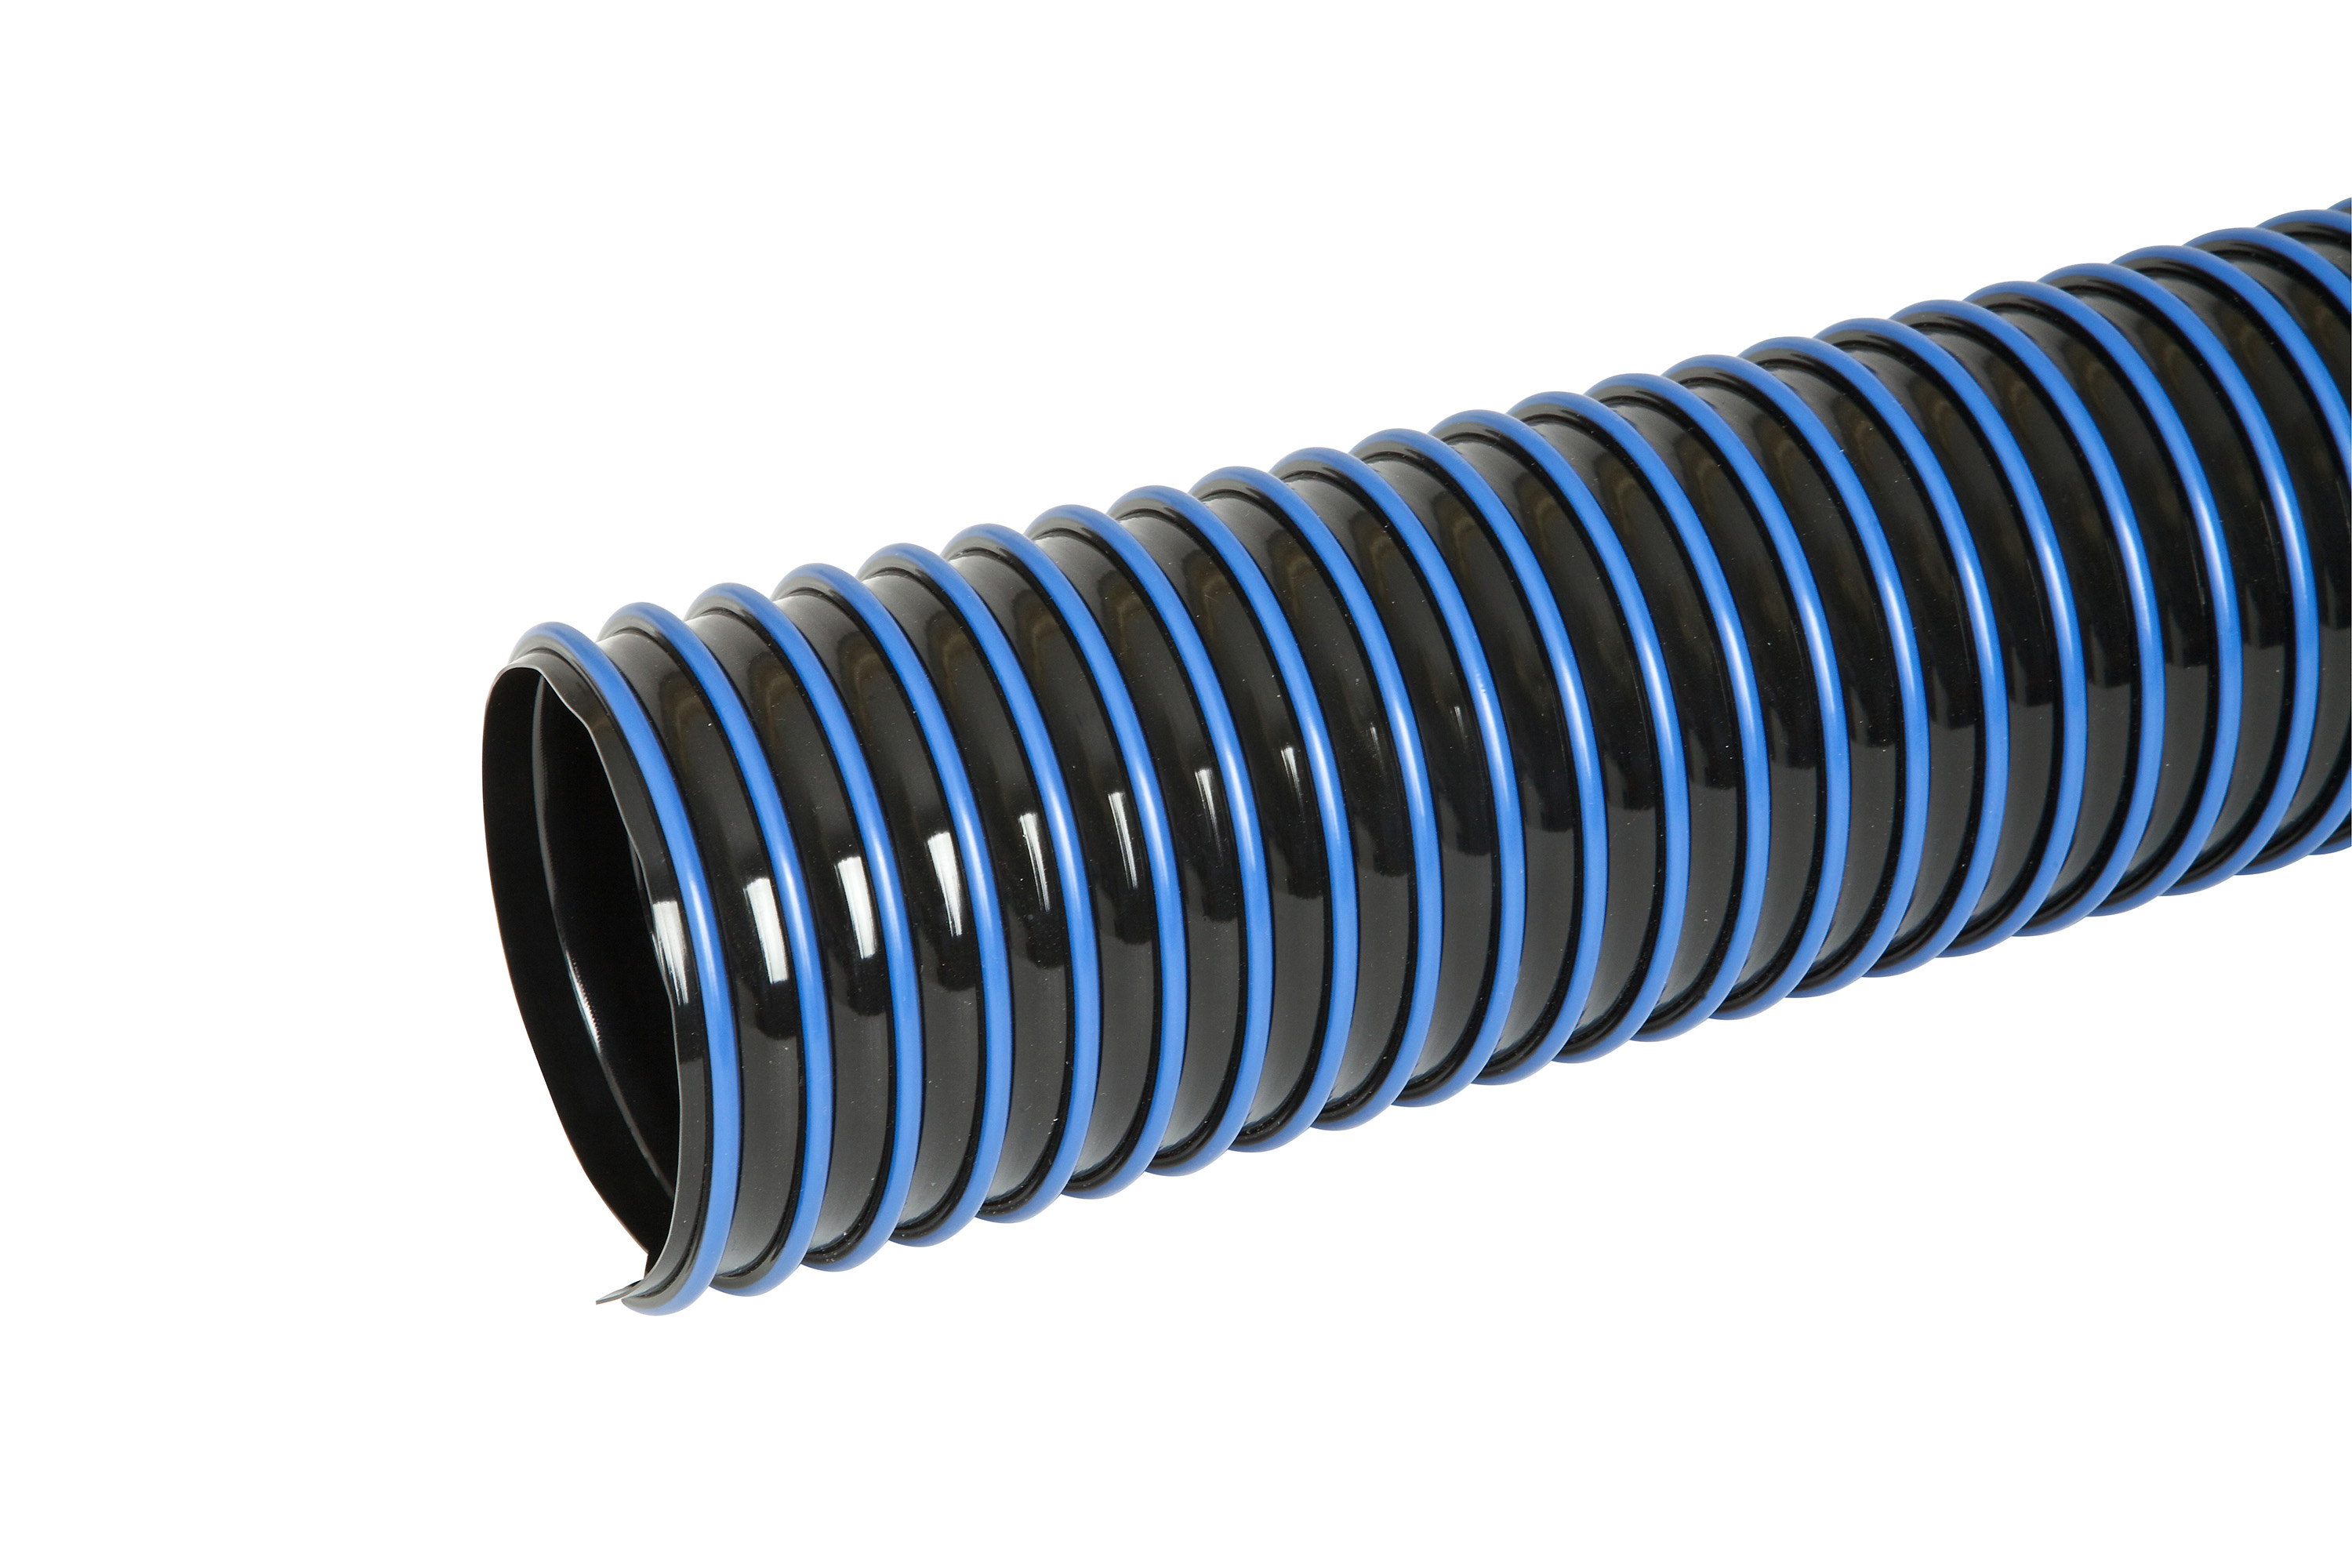 The anti-static hose comes in both 2-1/2" and 4" diameter.